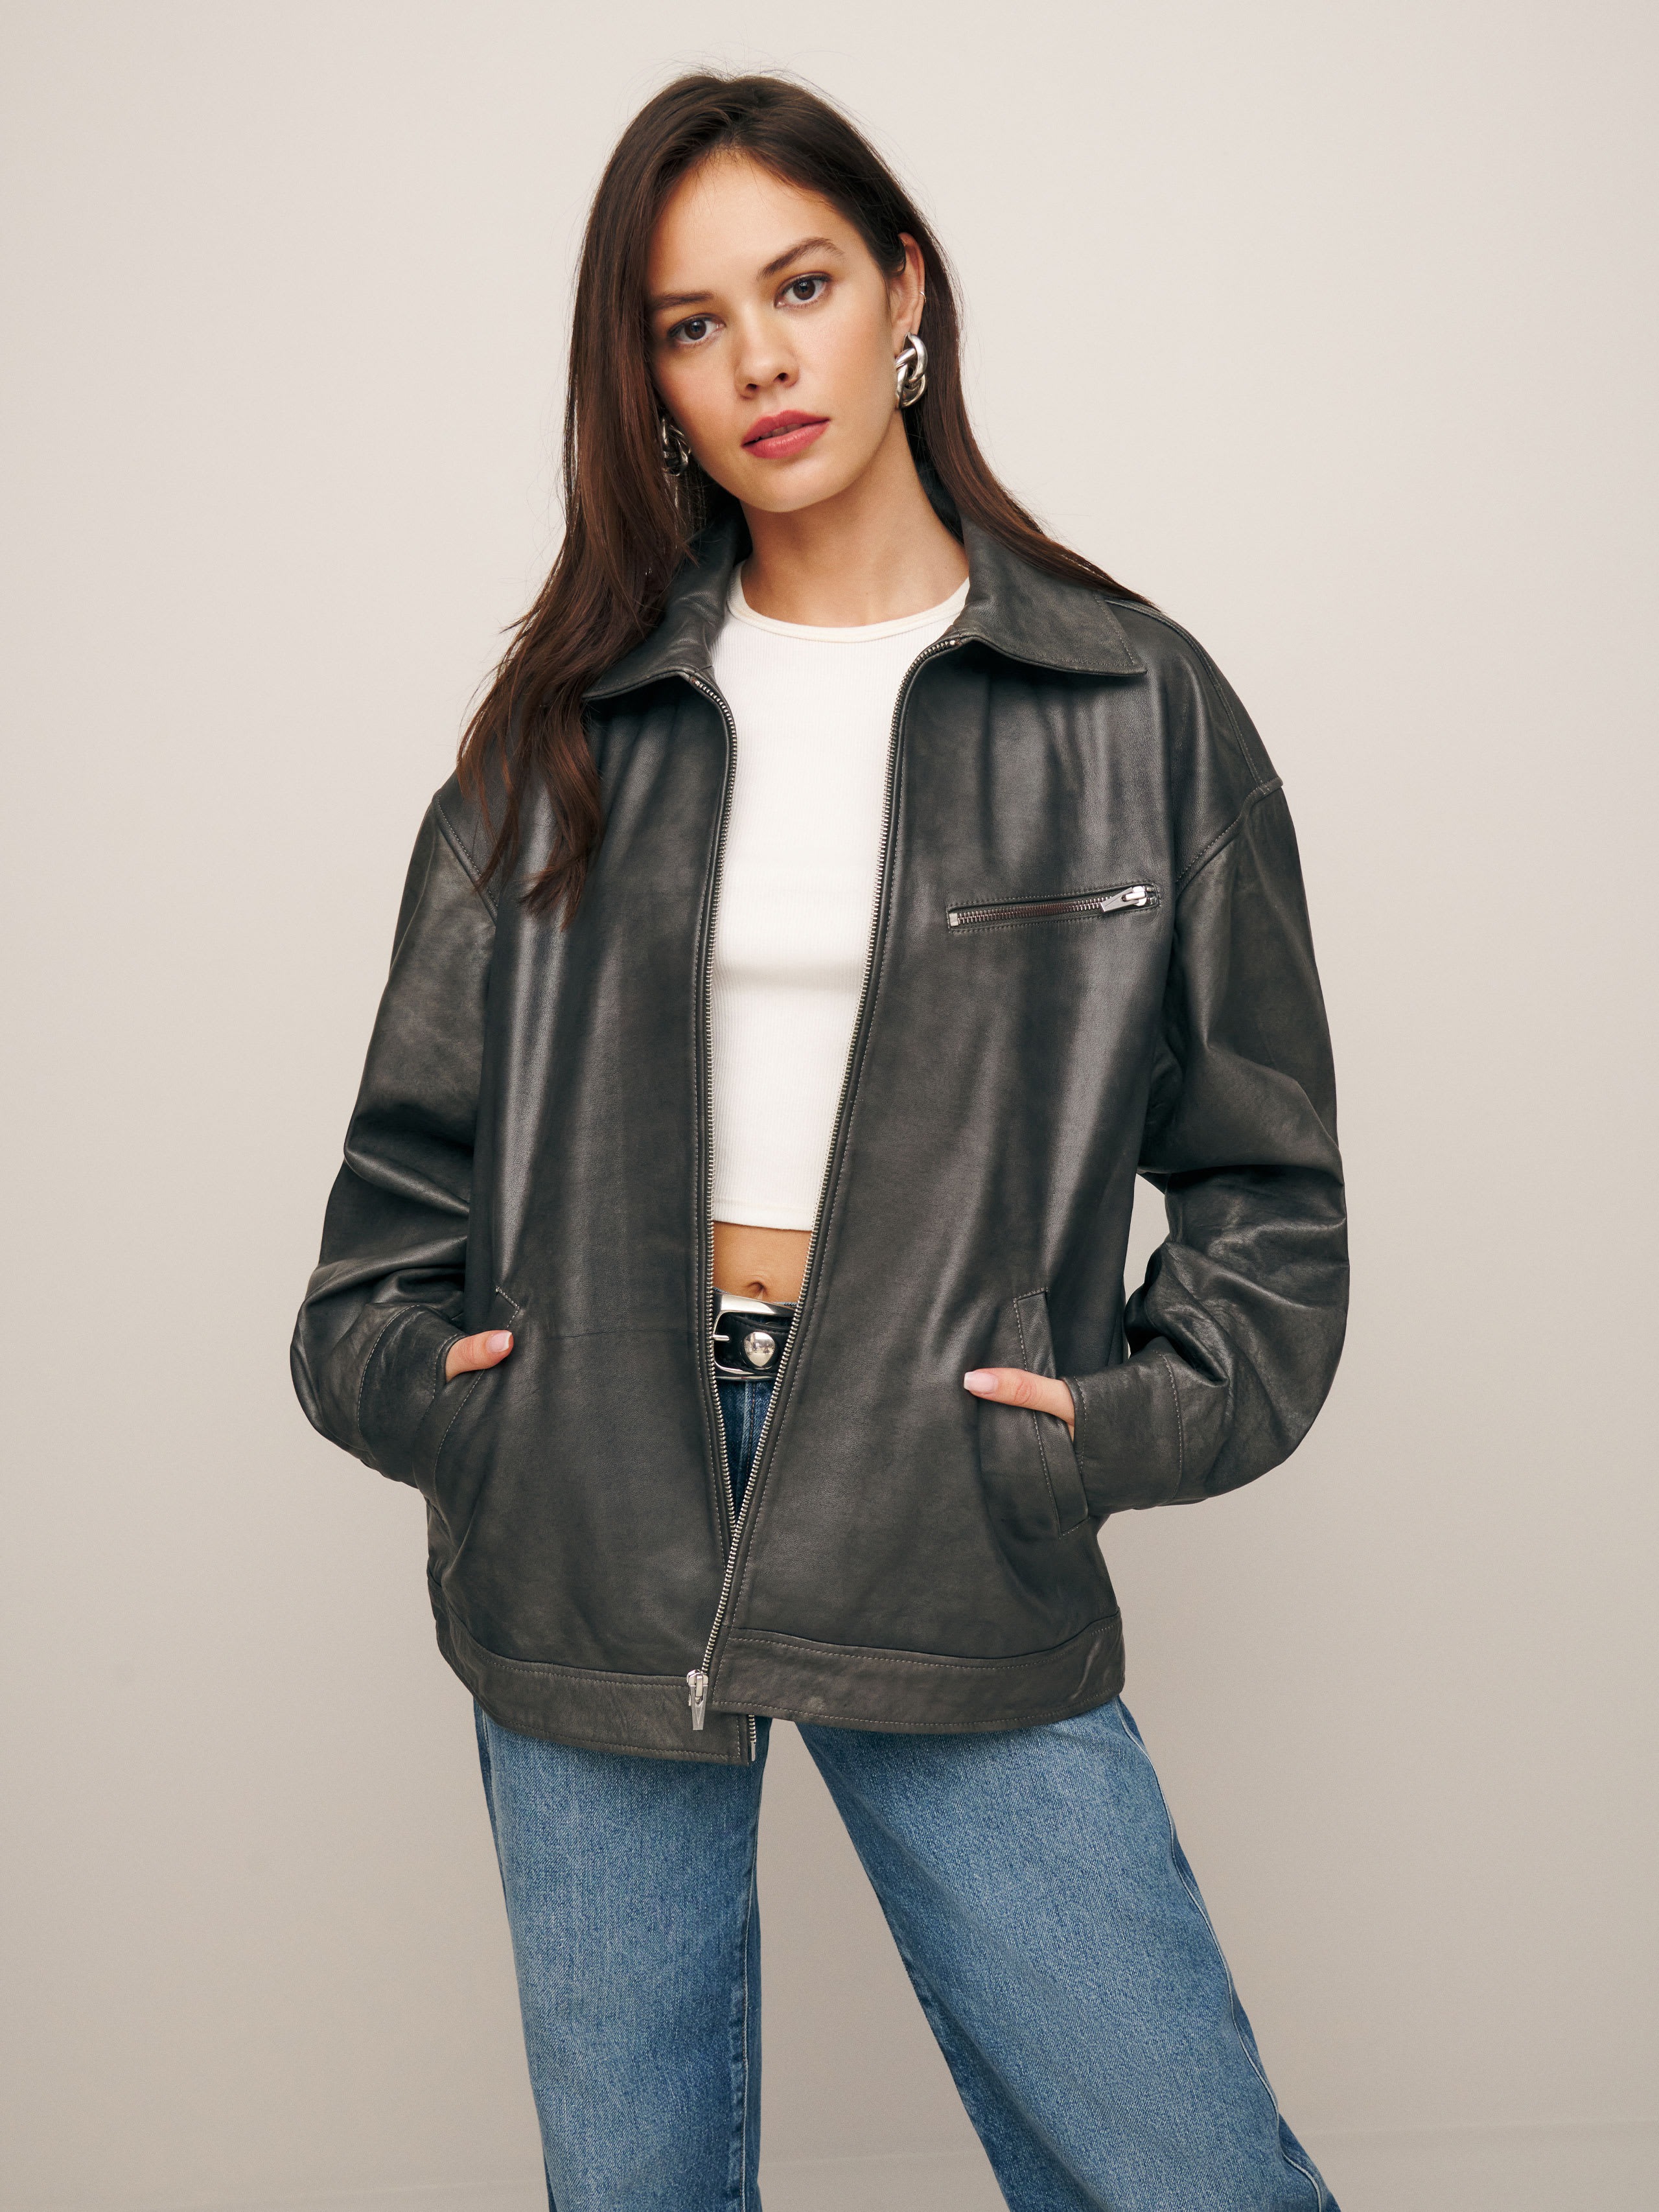 Reformation Marco leather jacket